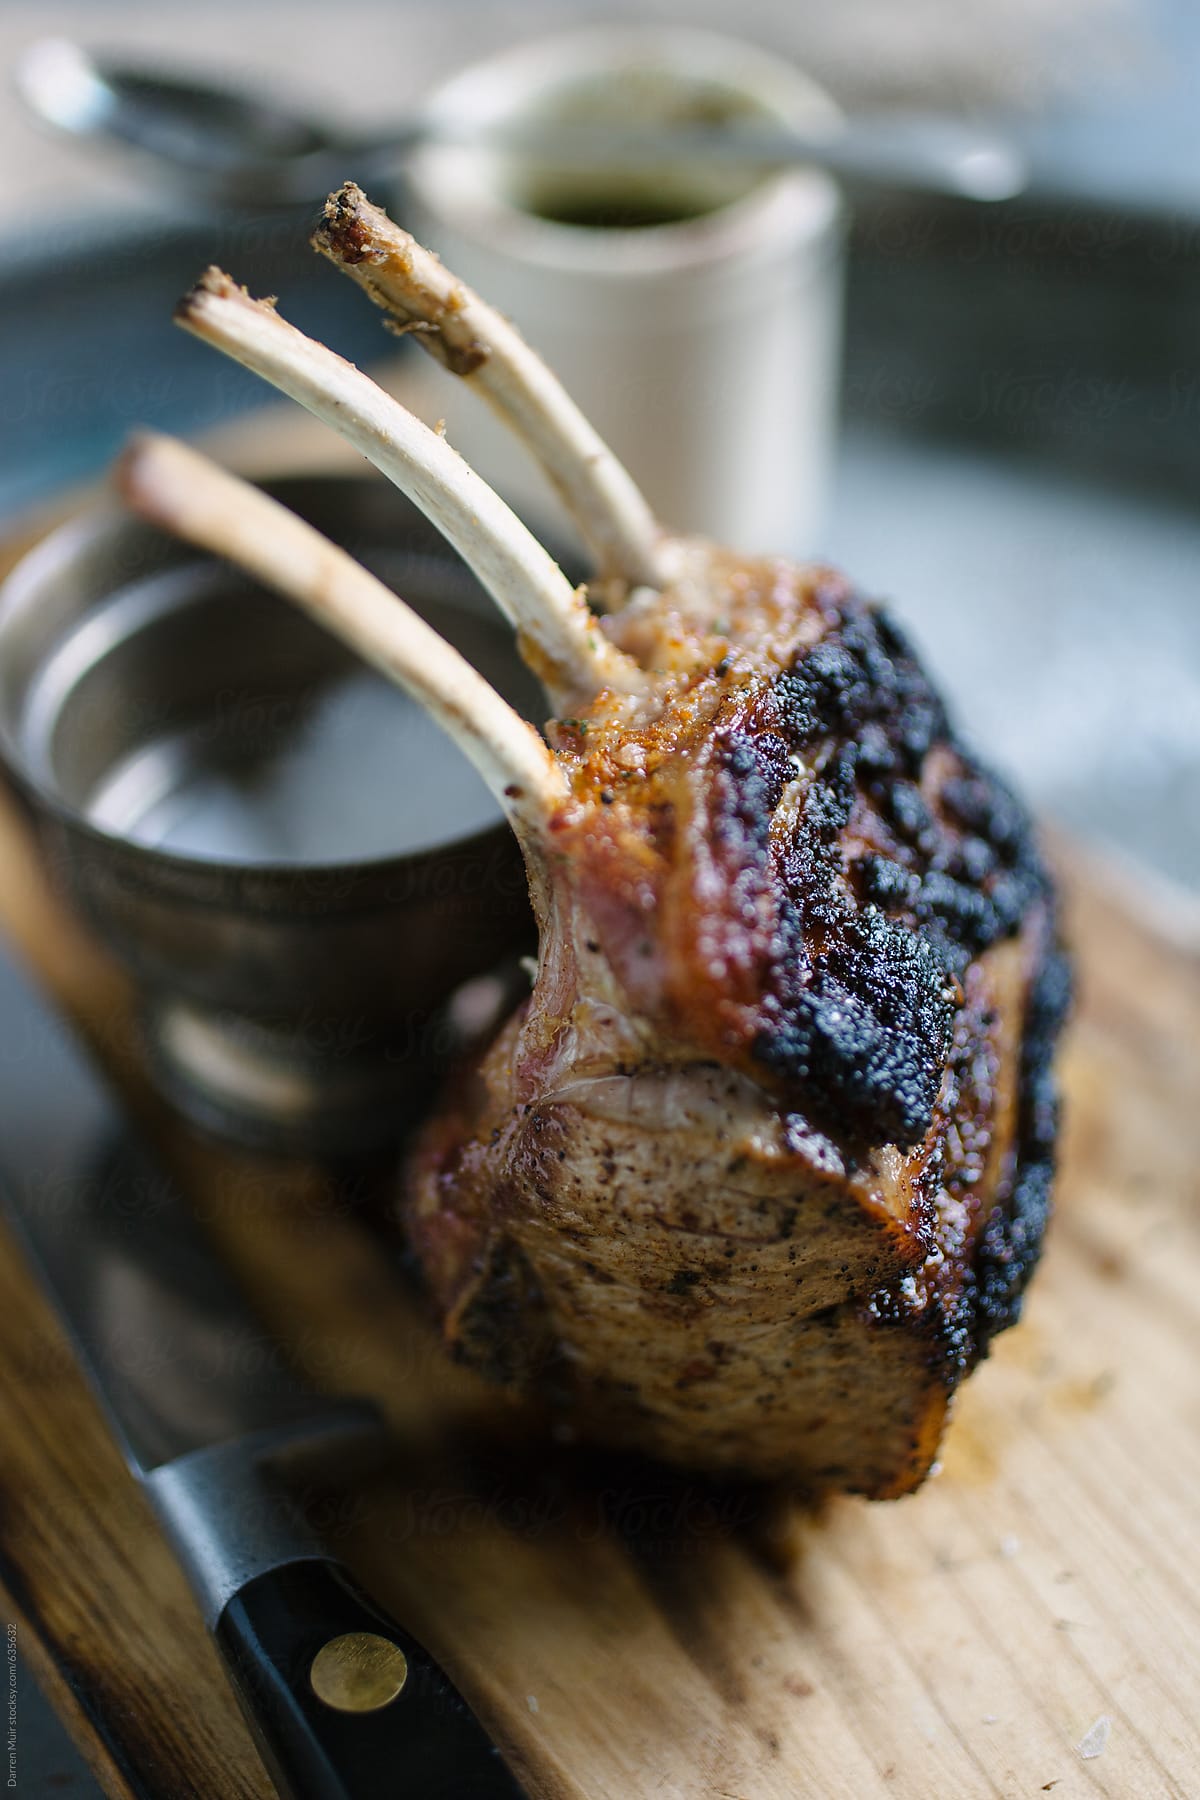 Rack of lamb on wooden board, selective focus.